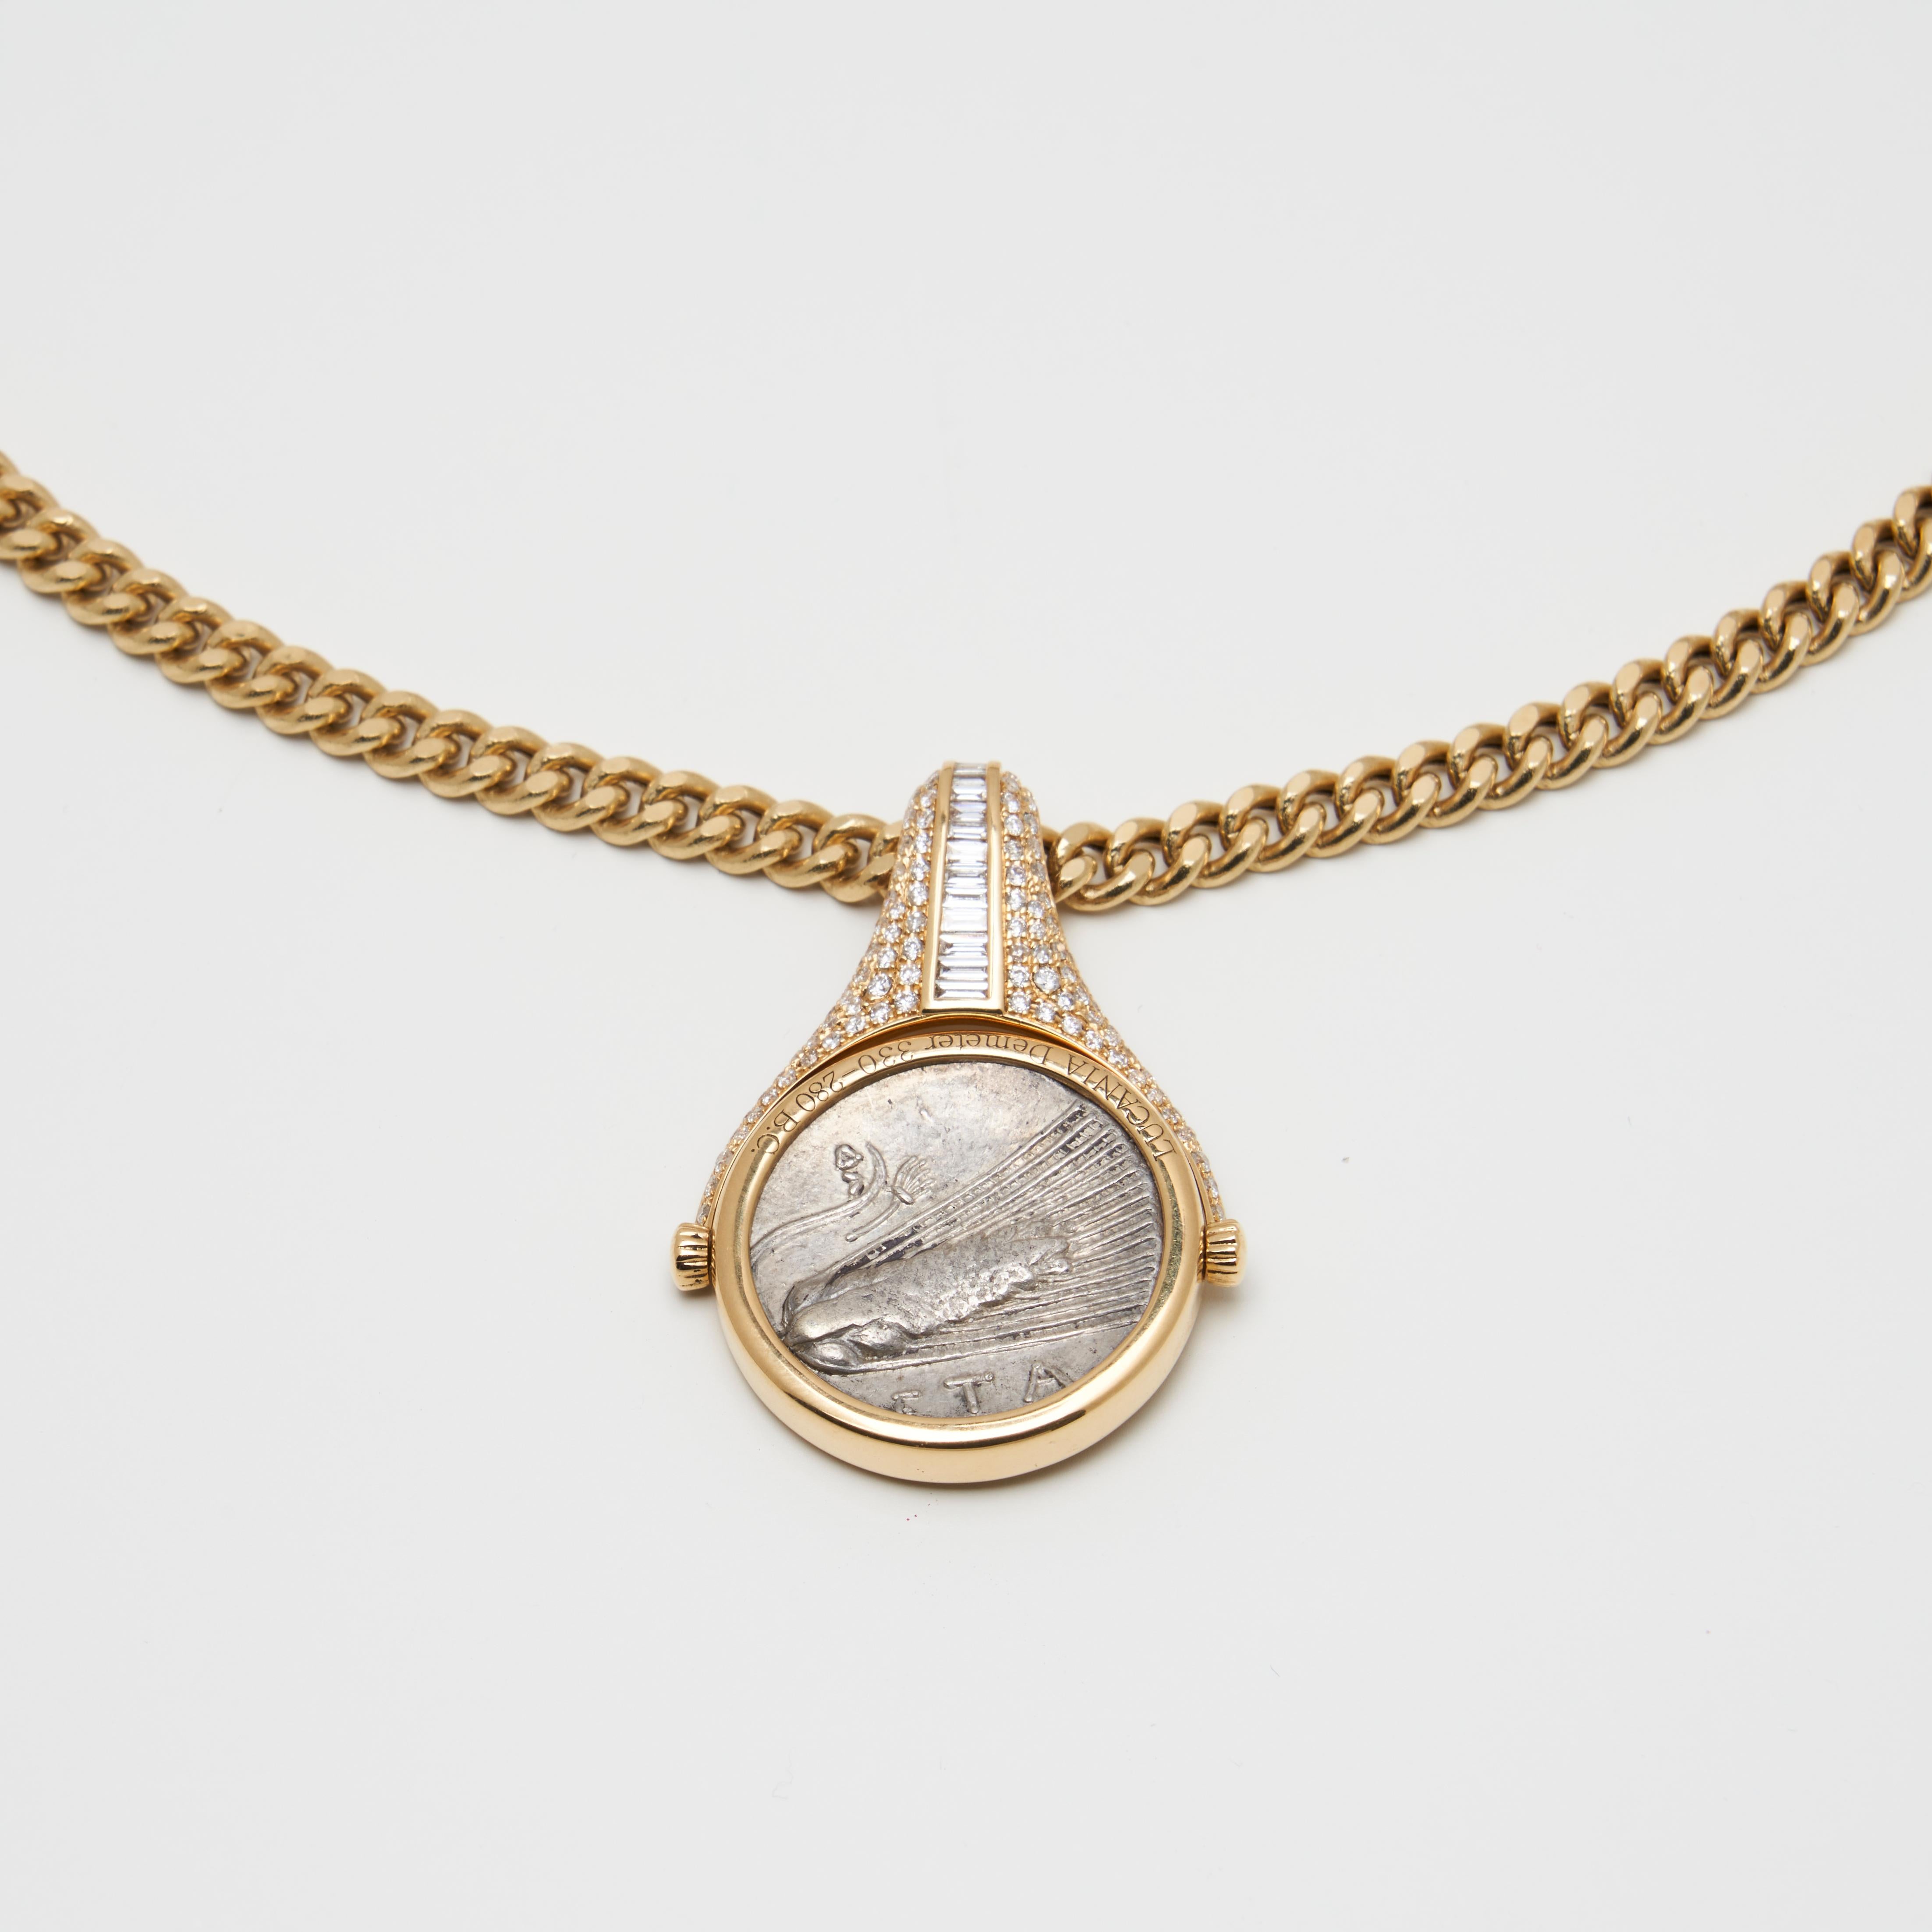 18-karat yellow gold
Ancient, authentic Greek silver coin center inset
Decorate with white diamonds 
Total weight is about 28.22g
Pendant Diameter: 35 mm*25mm
Pendant Thickness: 3mm 
Chain width: 4 mm
Chain length: 16 inches
Sold with certificate of